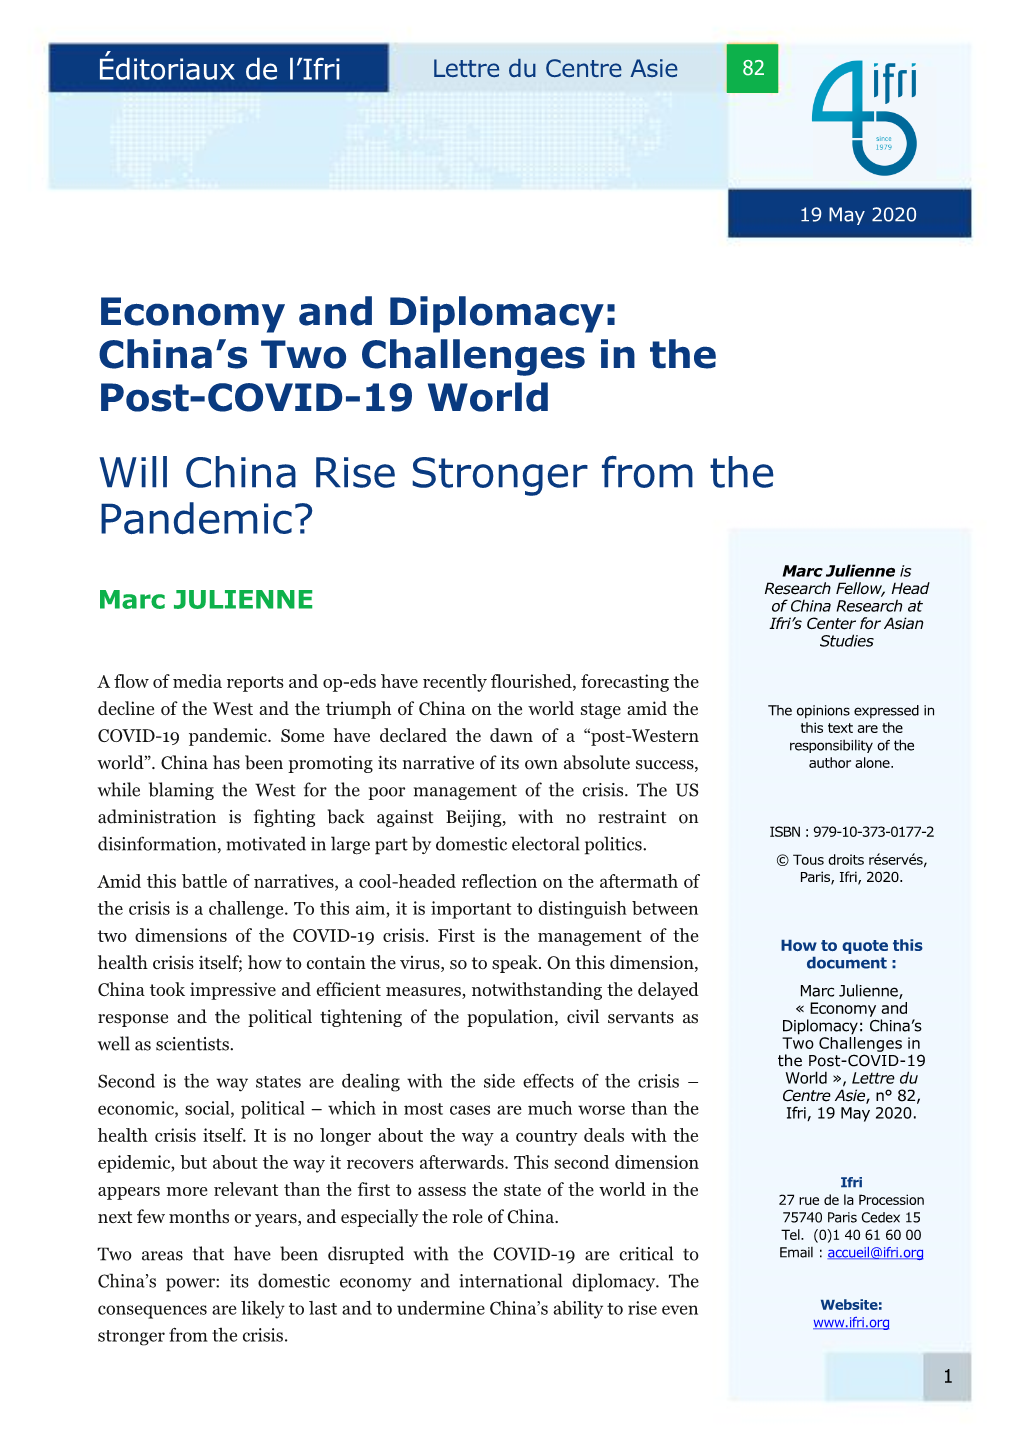 Economy and Diplomacy: China's Two Challenges in the Post-COVID-19